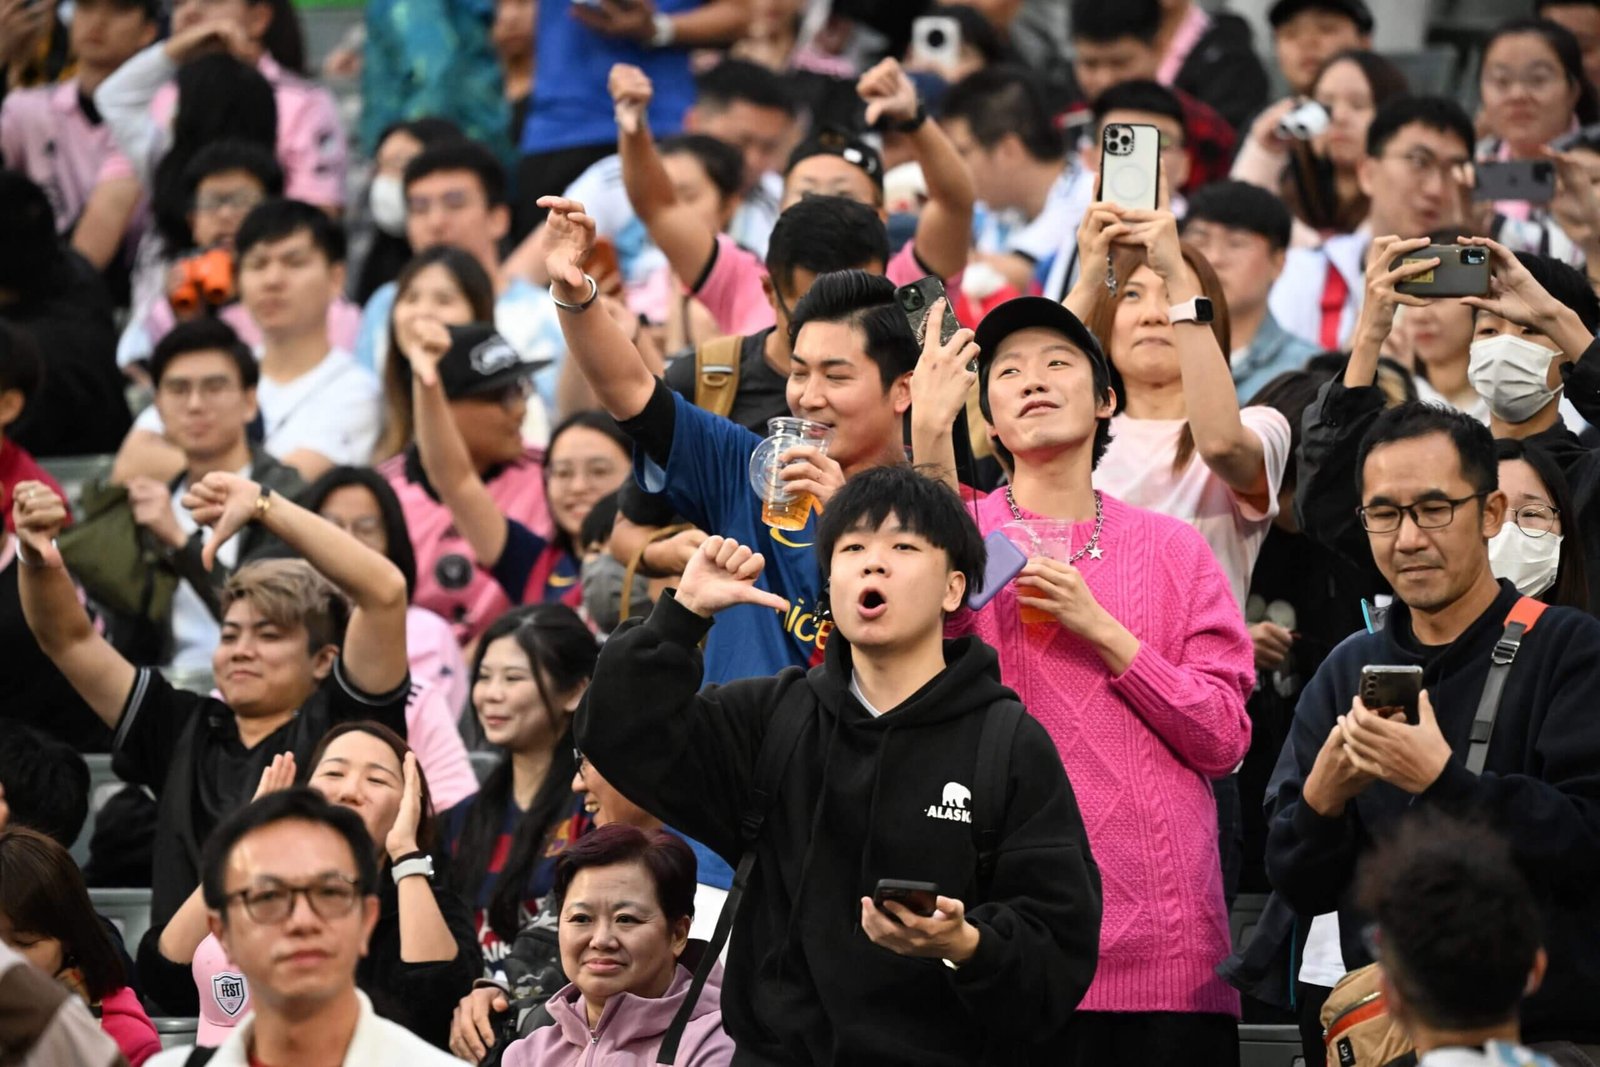 Fans at Hong Kong Stadium were unhappy at Messi's absence (Peter Parks/AFP via Getty Images)